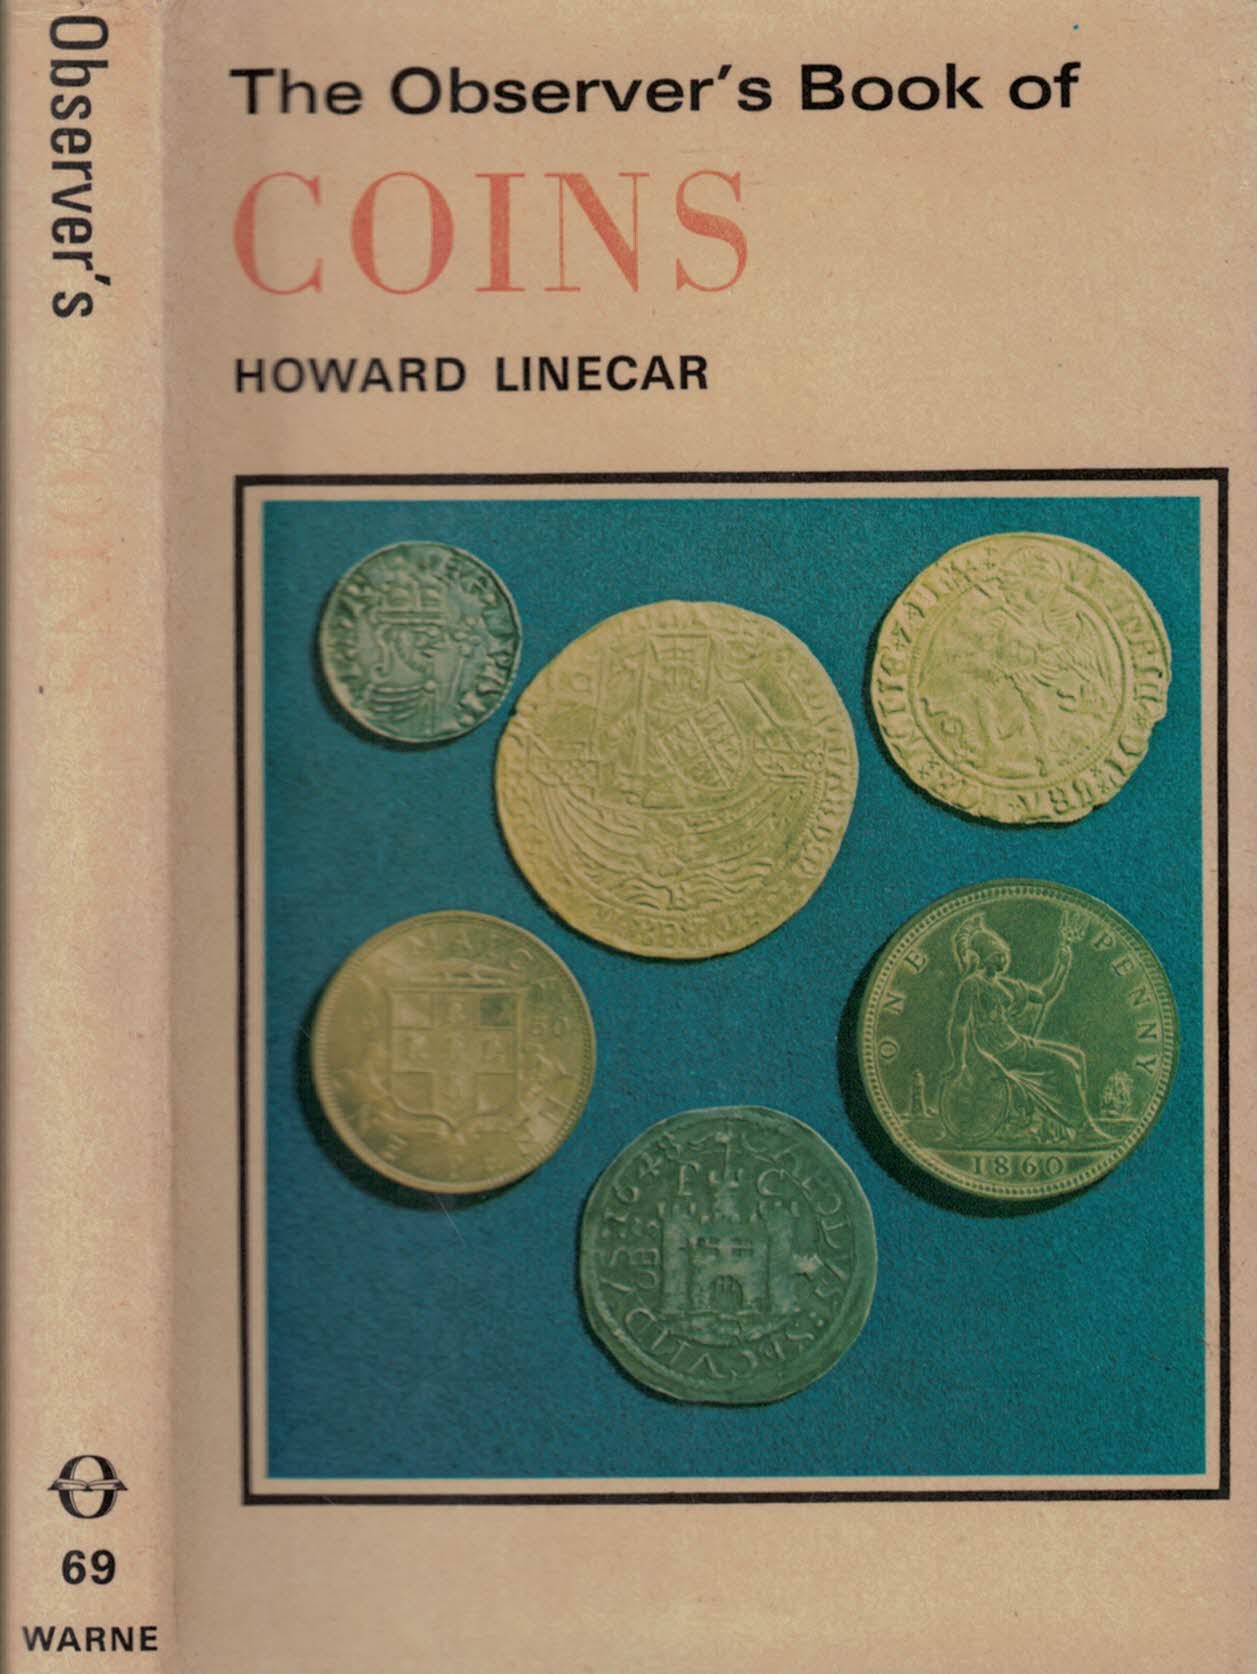 The Observer's Book of Coins. 1977.